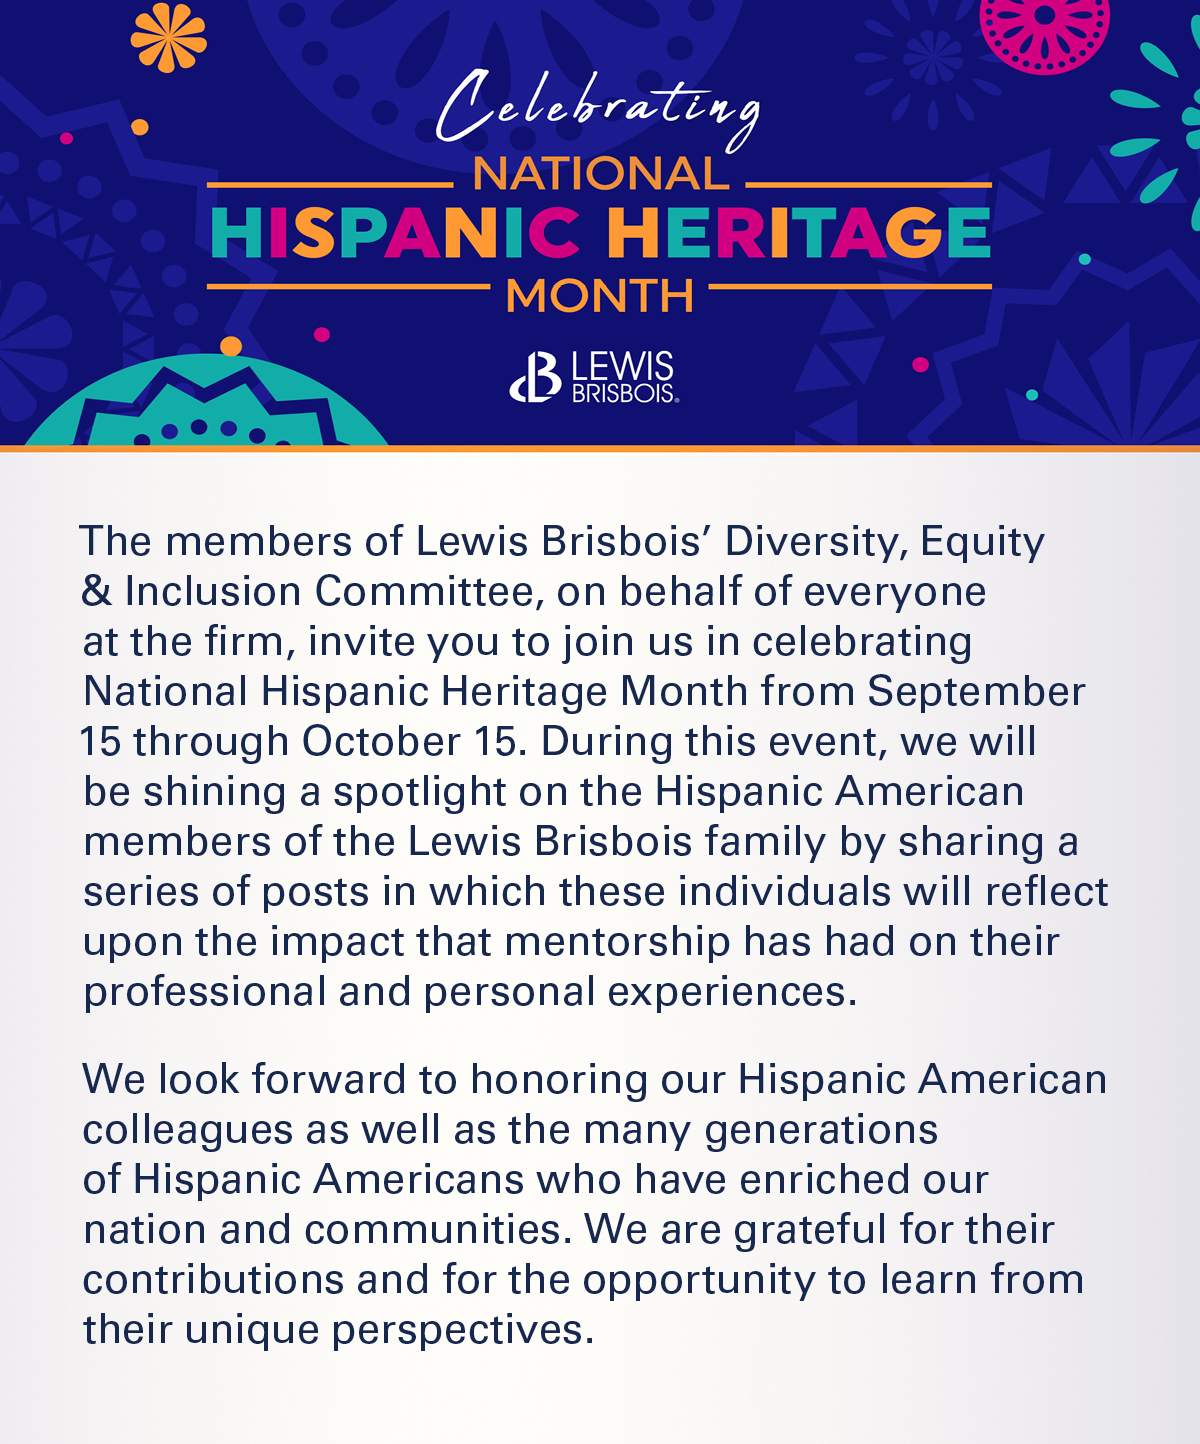 The members of Lewis Brisbois’ Diversity, Equity & Inclusion Committee, on behalf of everyone at the firm, invite you to join us in celebrating National Hispanic Heritage Month from September 15 through October 15. During this event, we will be shining a spotlight on the Hispanic American members of the Lewis Brisbois family by sharing a series of posts in which these individuals will reflect upon the impact that mentorship has had on their professional and personal experiences.     We look forward to honoring our Hispanic American colleagues as well as the many generations of Hispanic Americans who have enriched our nation and communities. We are grateful for their contributions and for the opportunity to learn from their unique perspectives.